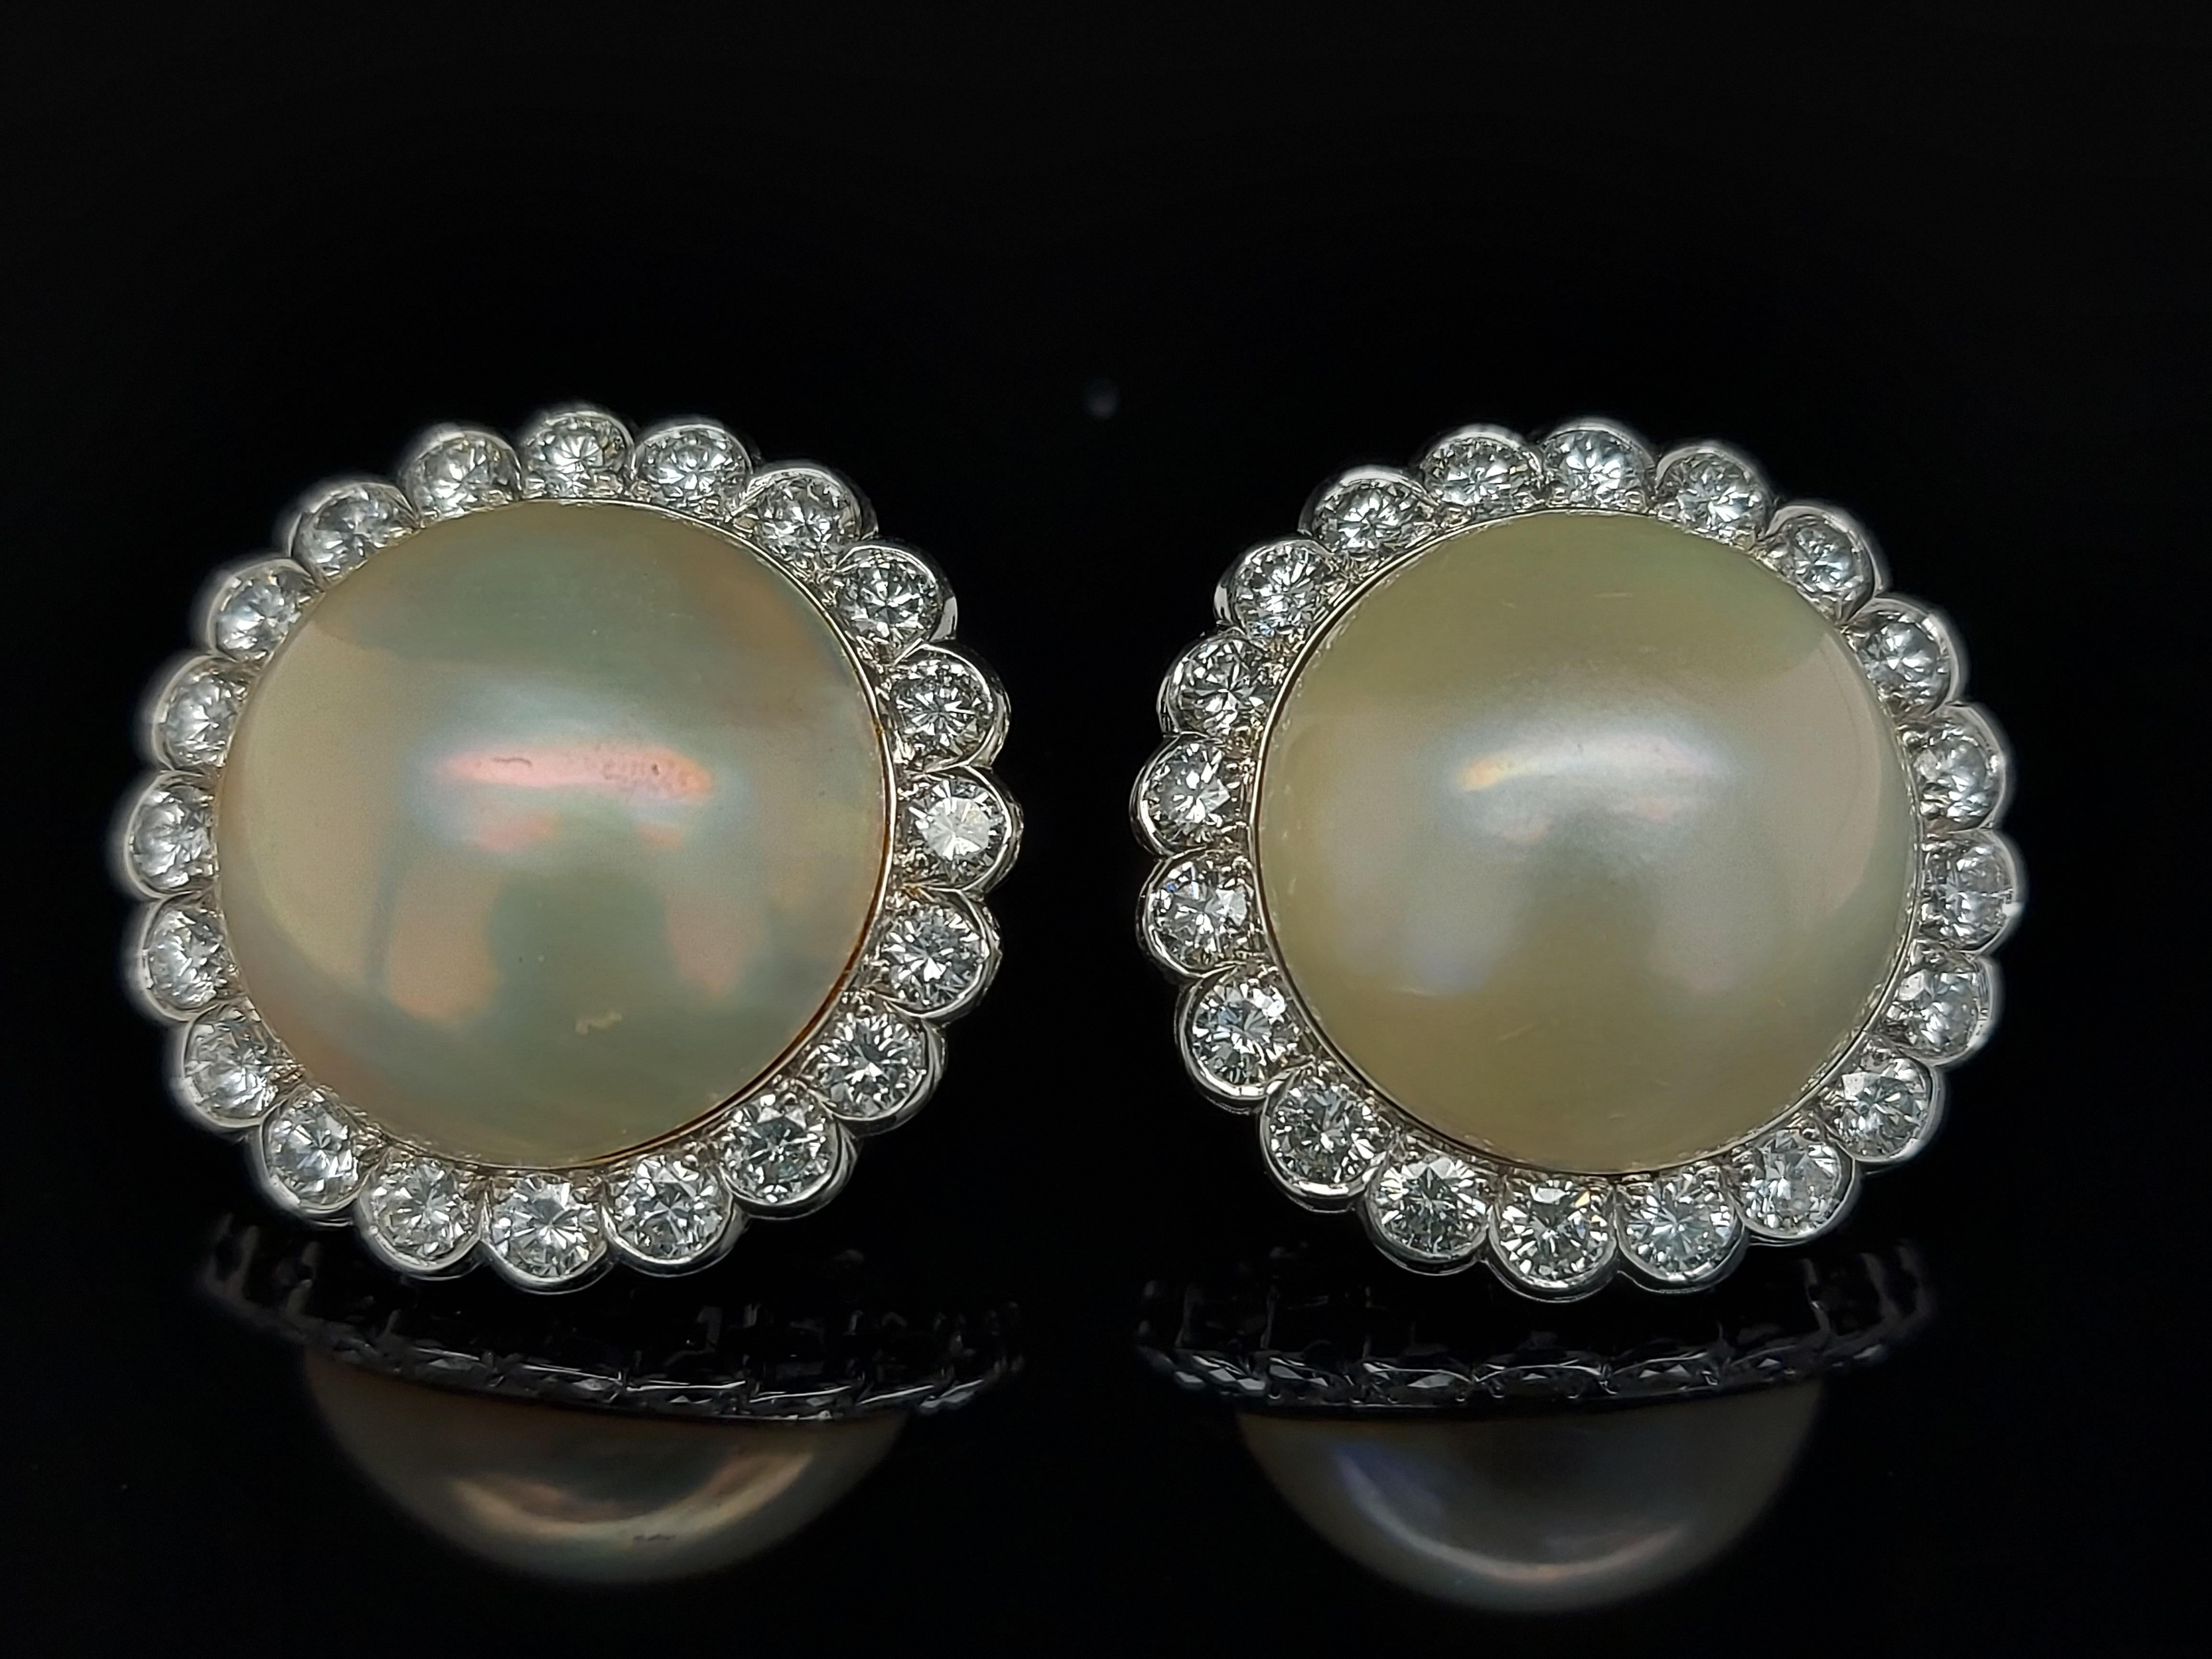 Gorgeous 18kt White Gold Mabe Pearl  Clip - On Earrings Surrounded with Diamonds.

Pearl: Diameter 16.7 mm

Diamonds: 40 round brilliant cut diamonds : 2,8 ct Top Quality brilliant cut diamonds.

Material: 18kt white gold.

Total weight: 14.3 gram /